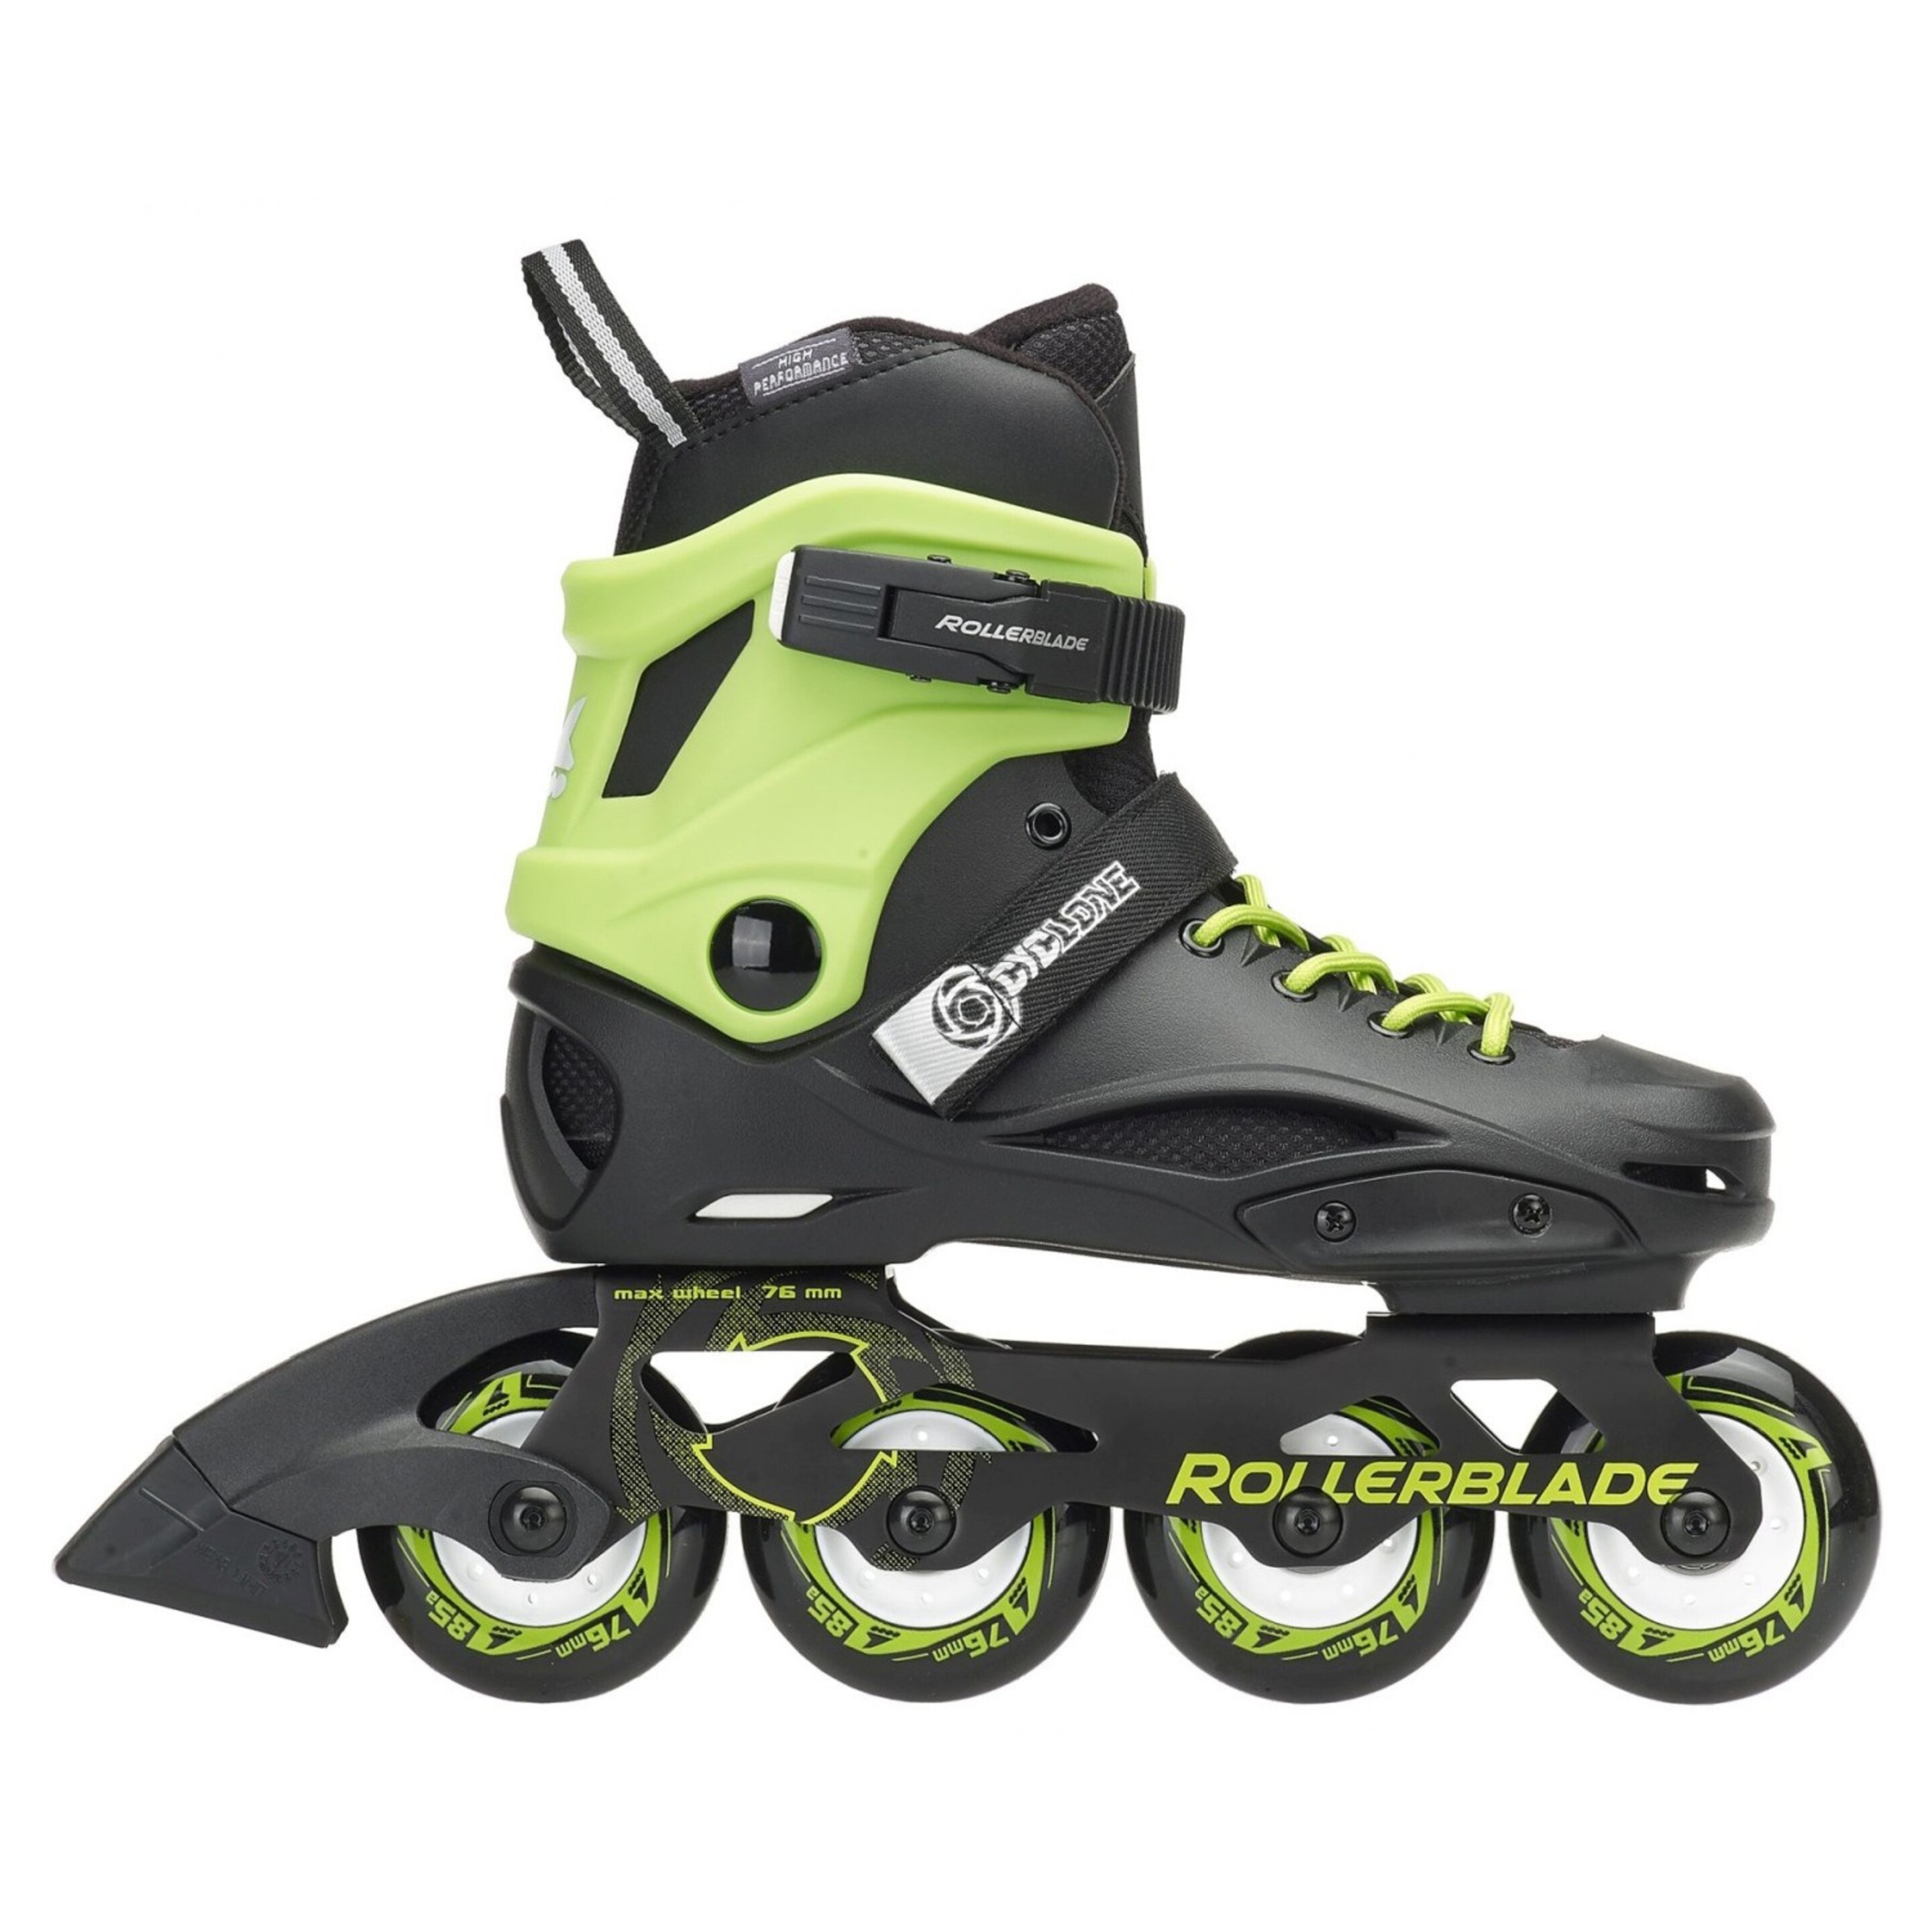 Patines Cyclone Rollerblade